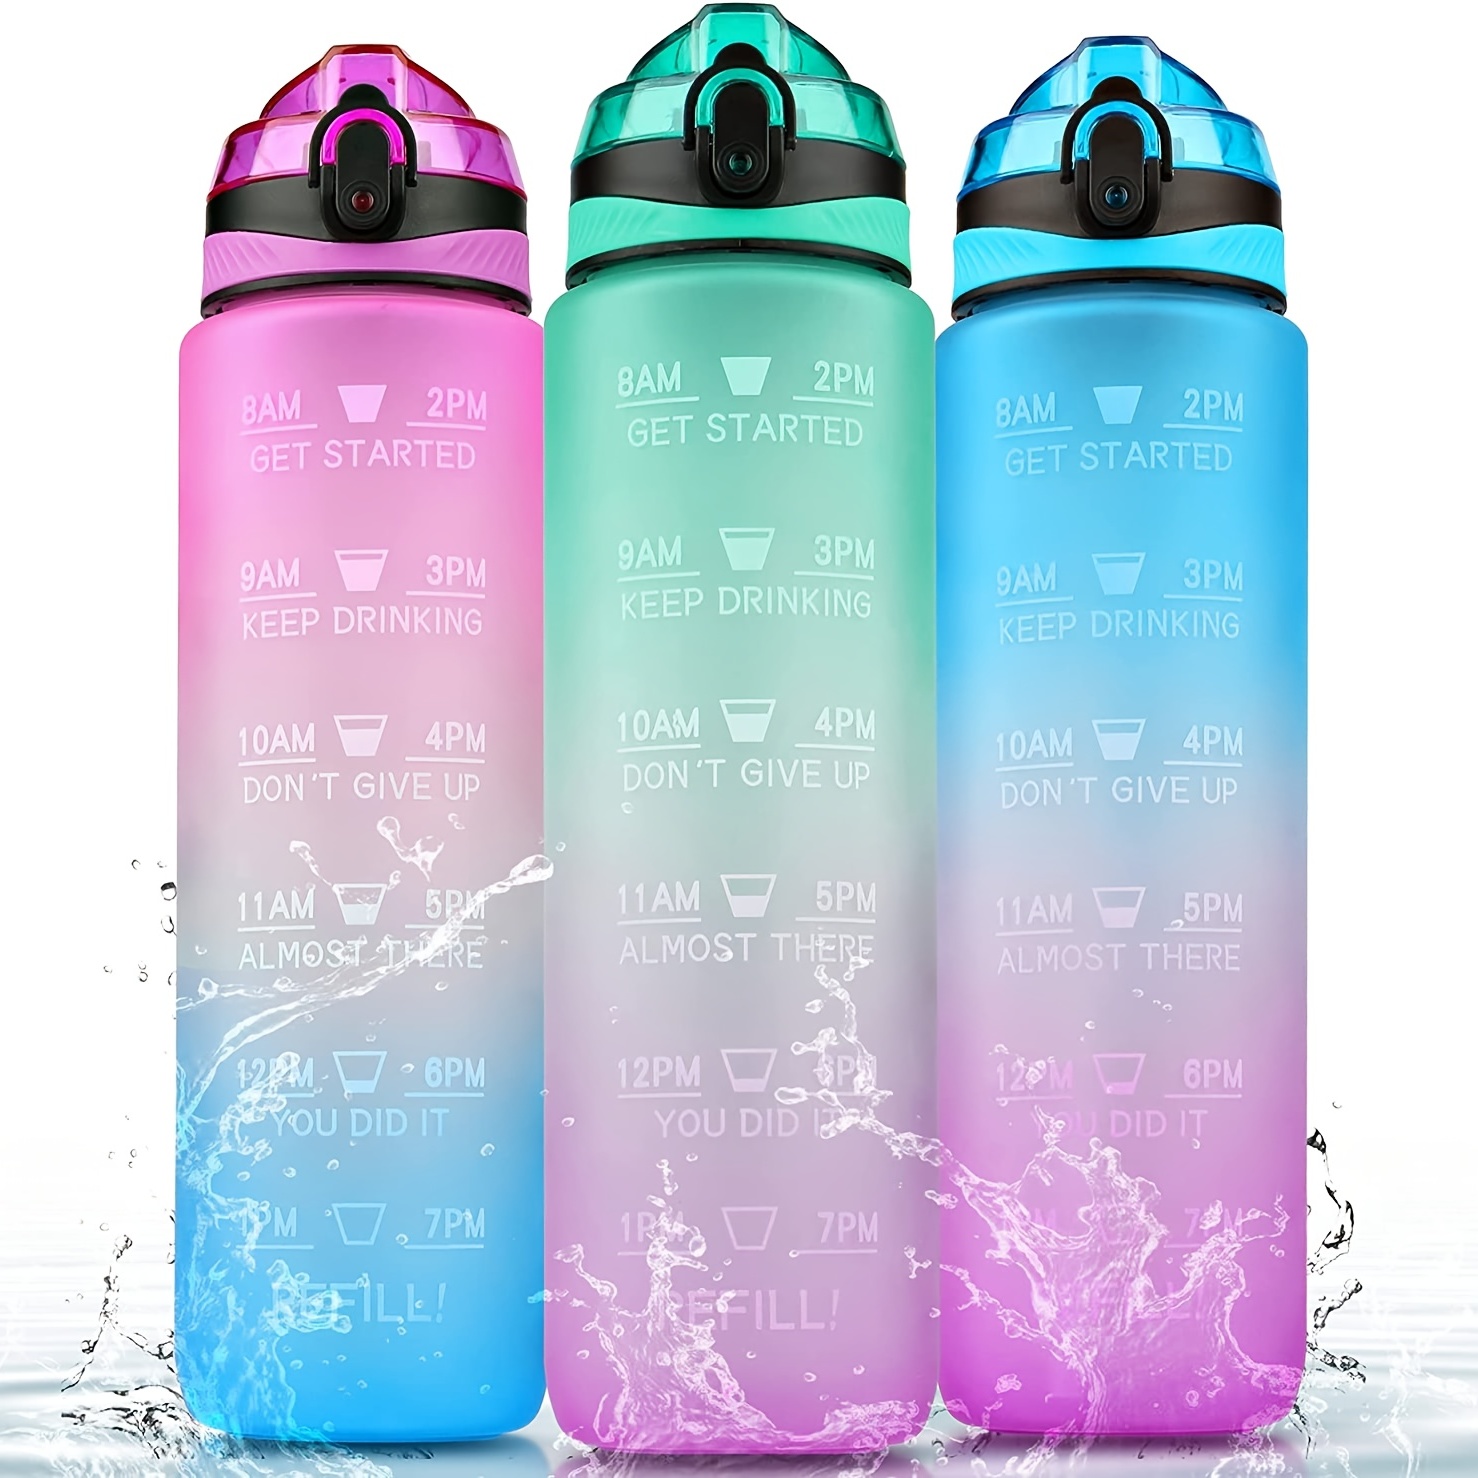 Gulex 32oz Motivational Water Bottles with Time Marker, Leak-proof BPA Free  Non-Toxic Drinking Sport…See more Gulex 32oz Motivational Water Bottles